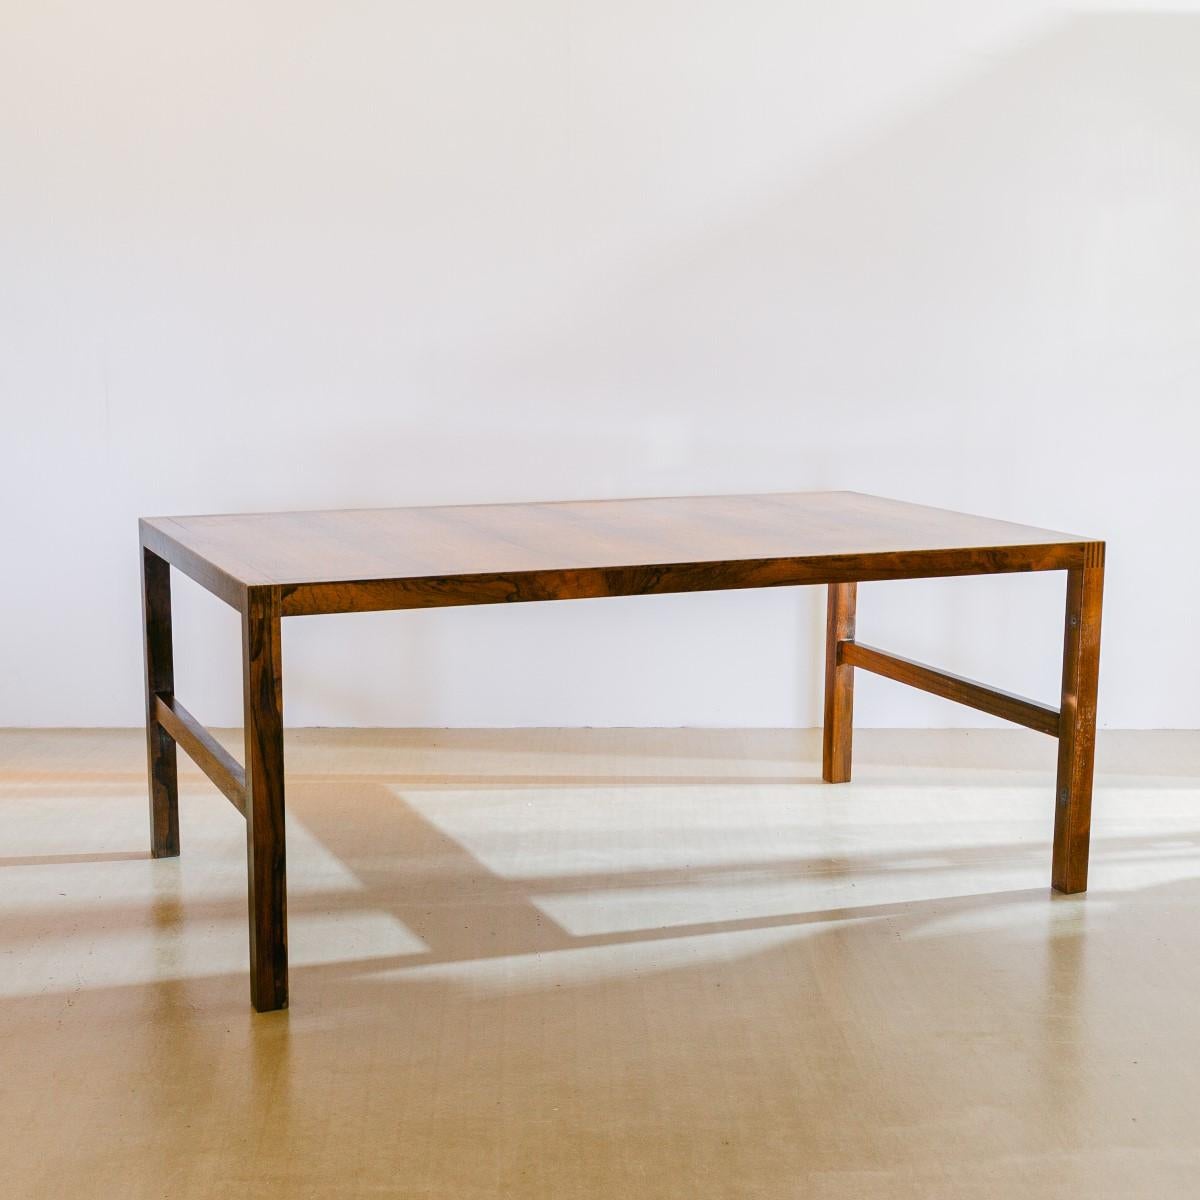 A large Finn Juhl designed Danish dining table with elegant modernist design showing off the beautiful wood grain. 1960s.